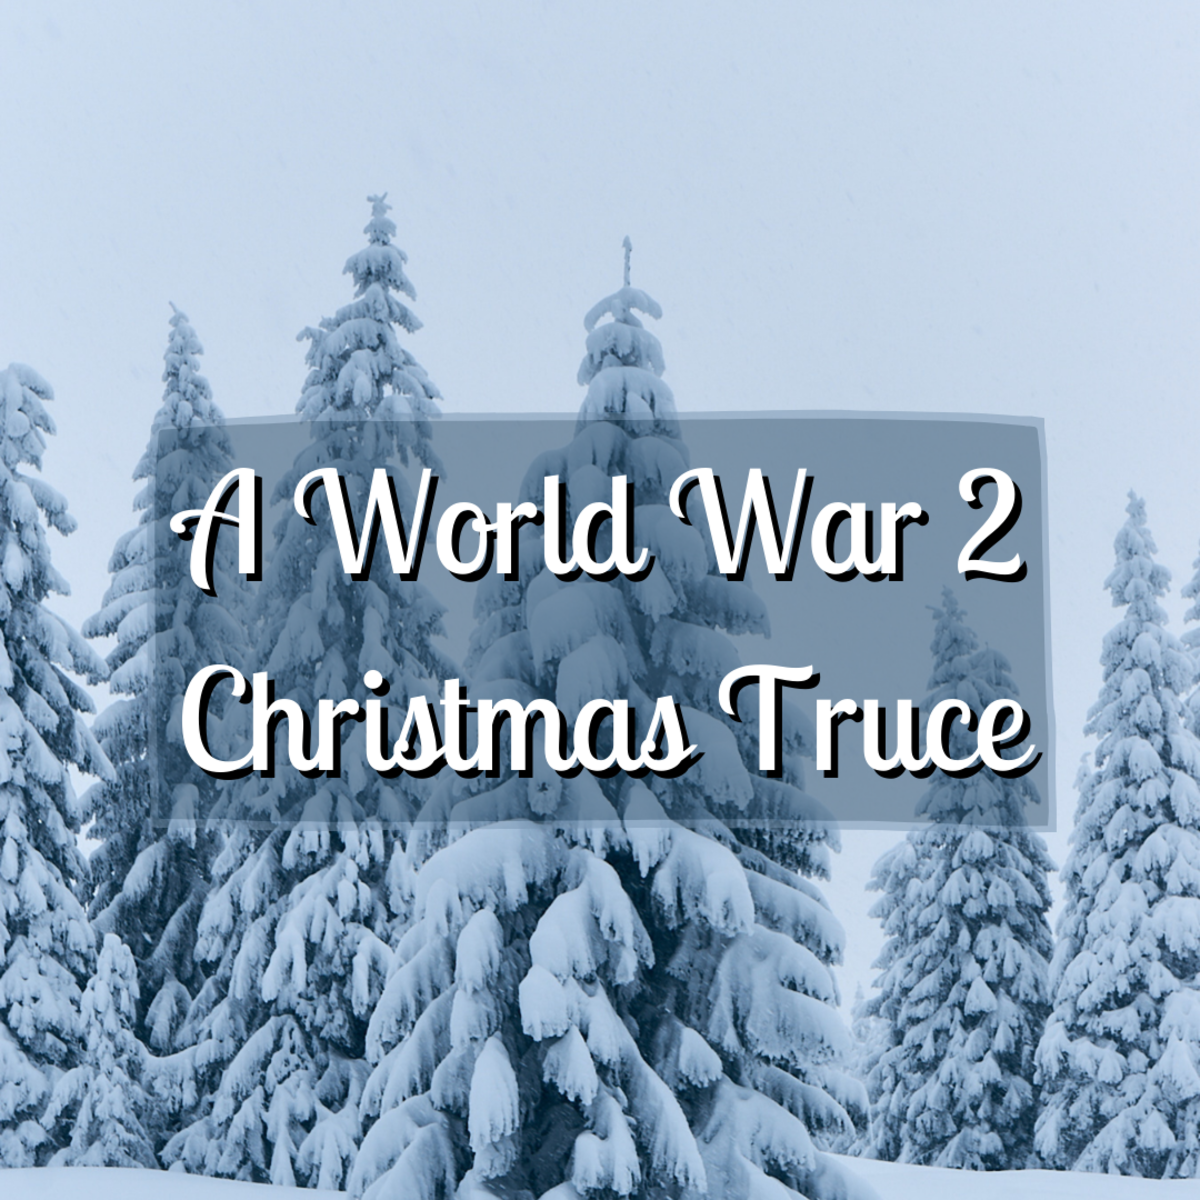 Read on to learn about an unusual truce that took place on Christmas Eve 1944. A few American and German soldiers were brought together by a German mother.